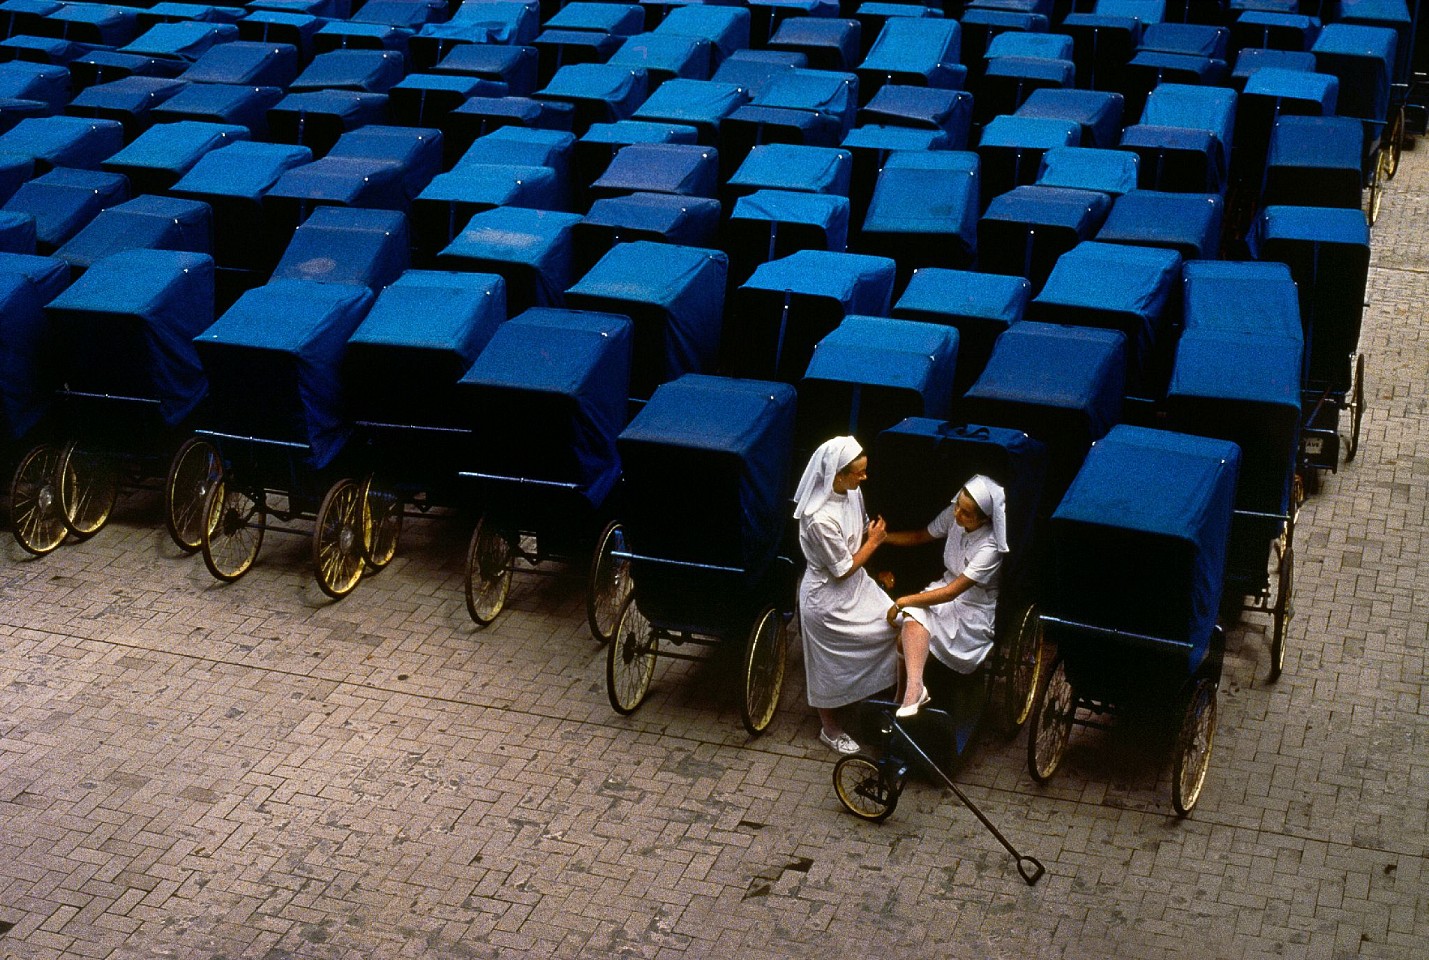 Steve McCurry, Two Nurses in Lourdes
FujiFlex Crystal Archive Print
Price/Size on request